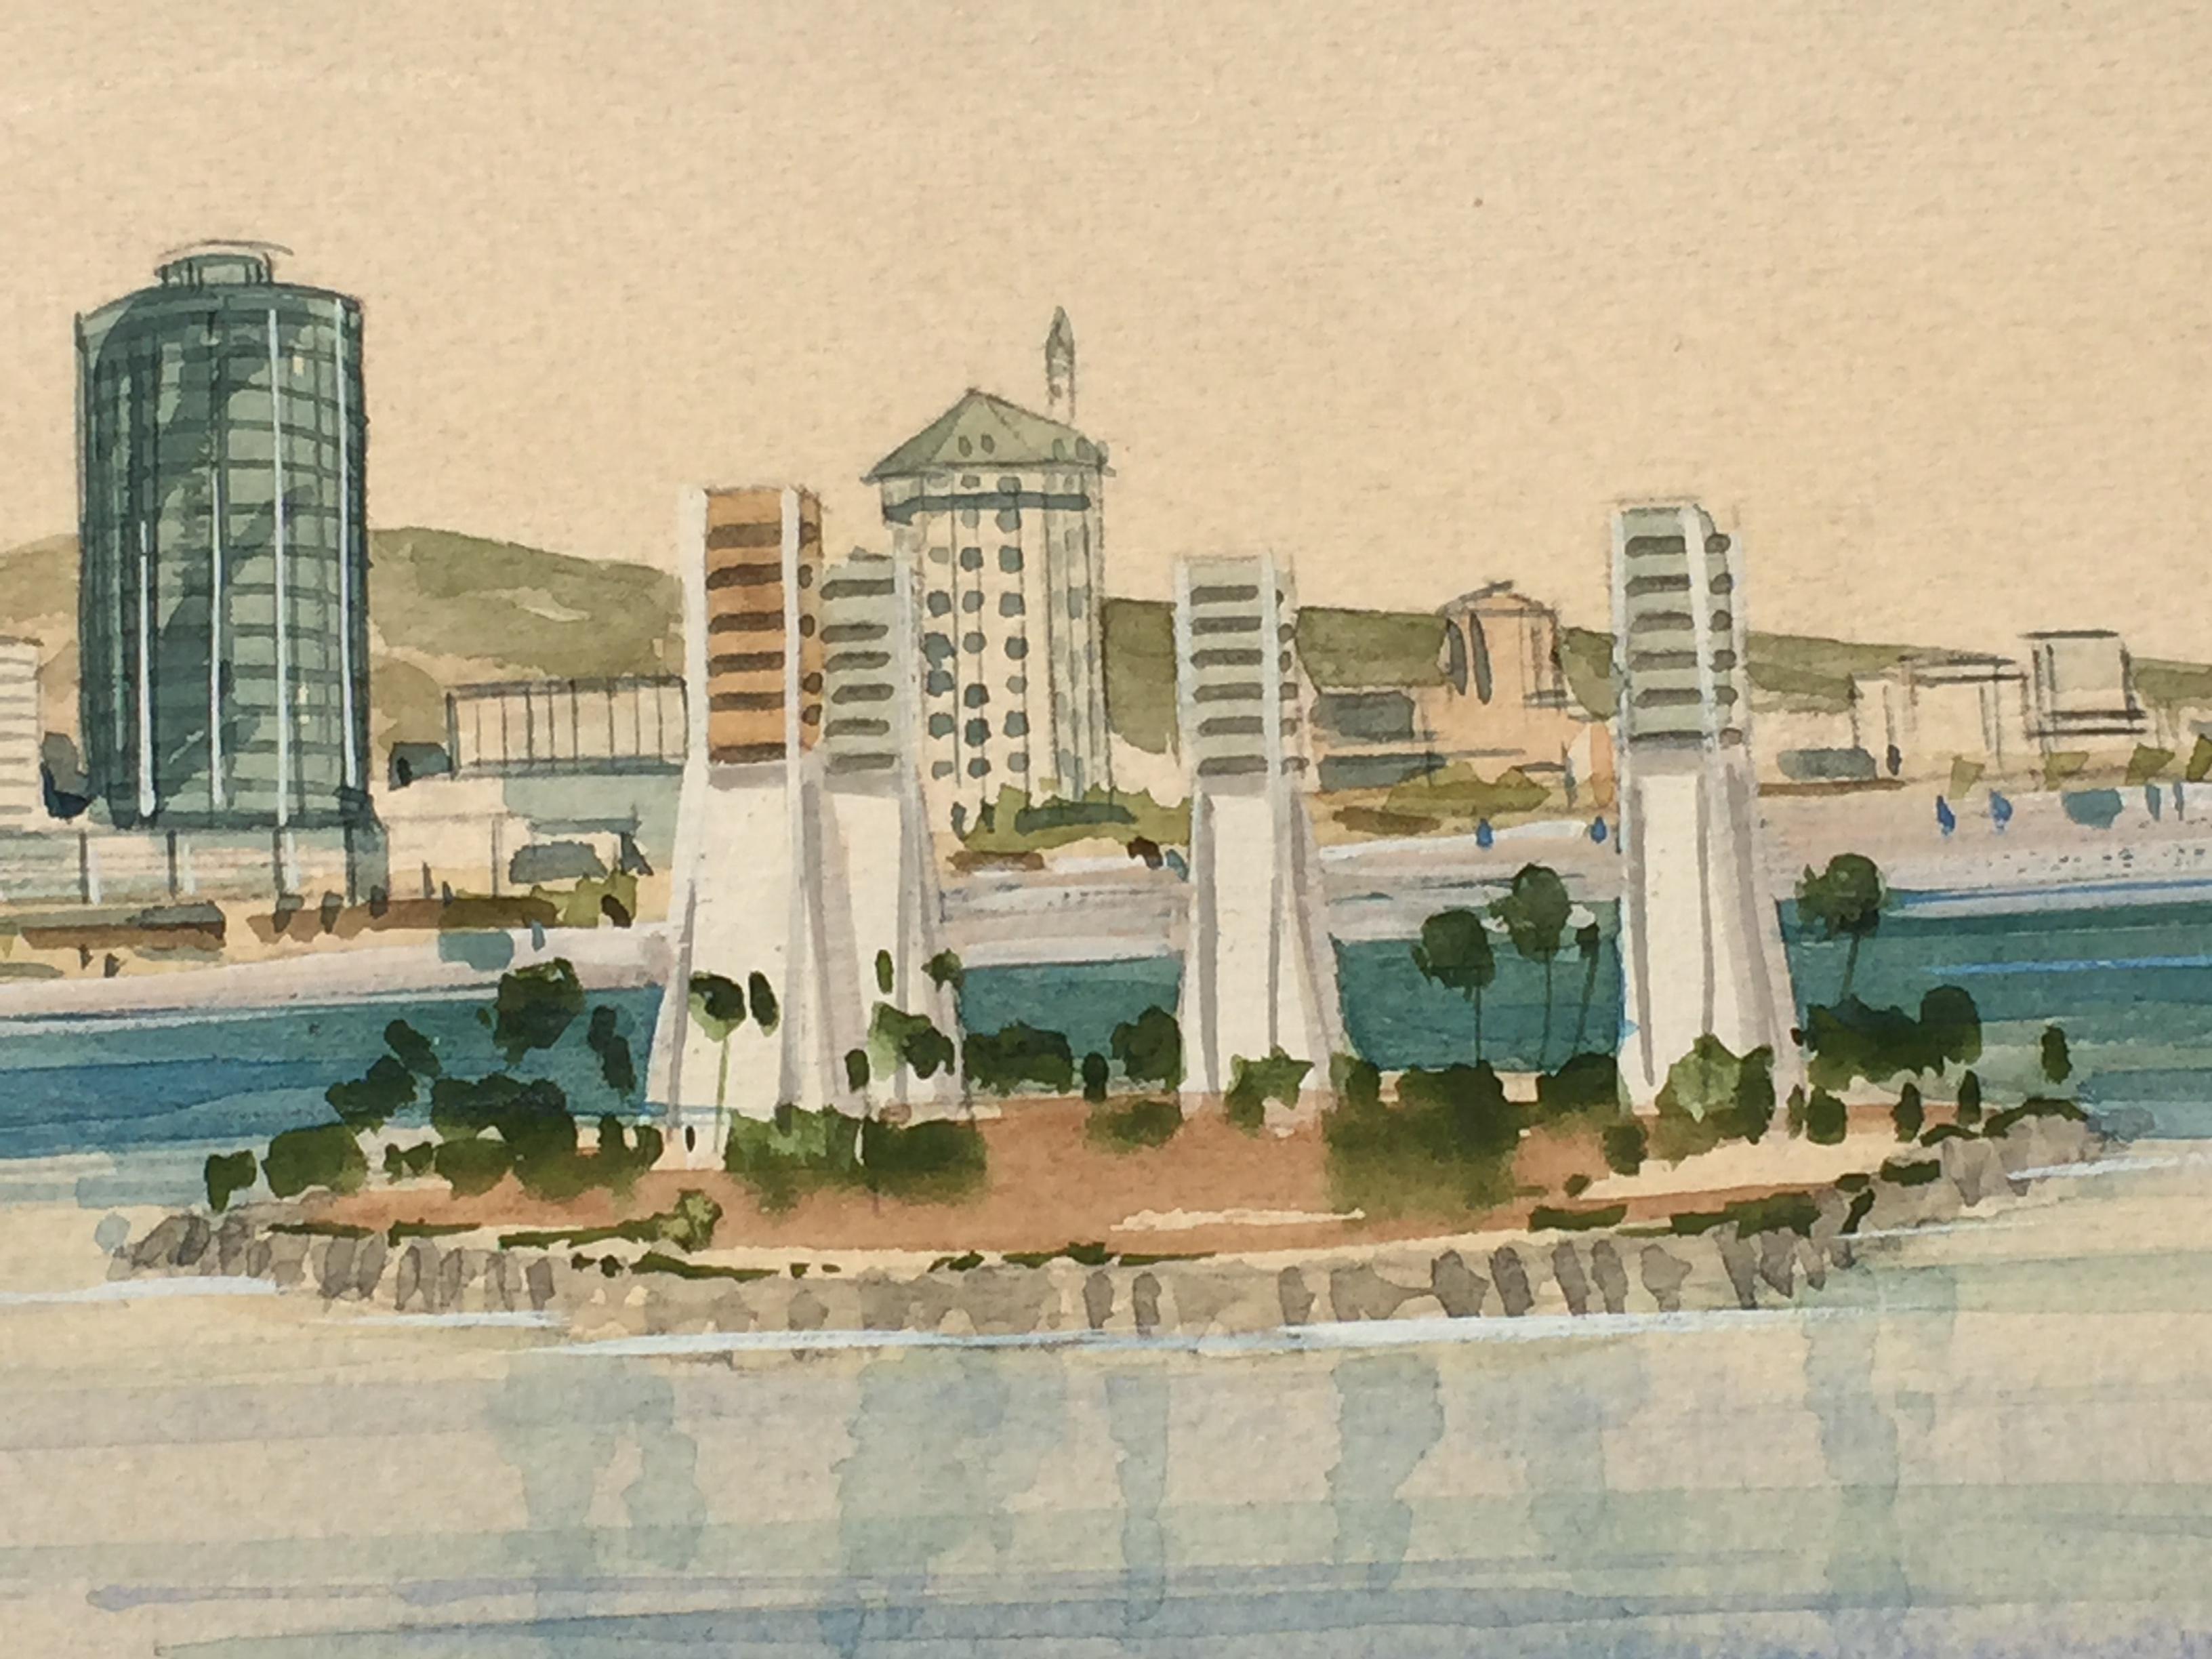 QUEEN MARY,  LONG BEACH,  CA -  ORIGINAL ARTIST DESIGN CONCEPT FOR PLACEMENT - Realist Art by Segroves